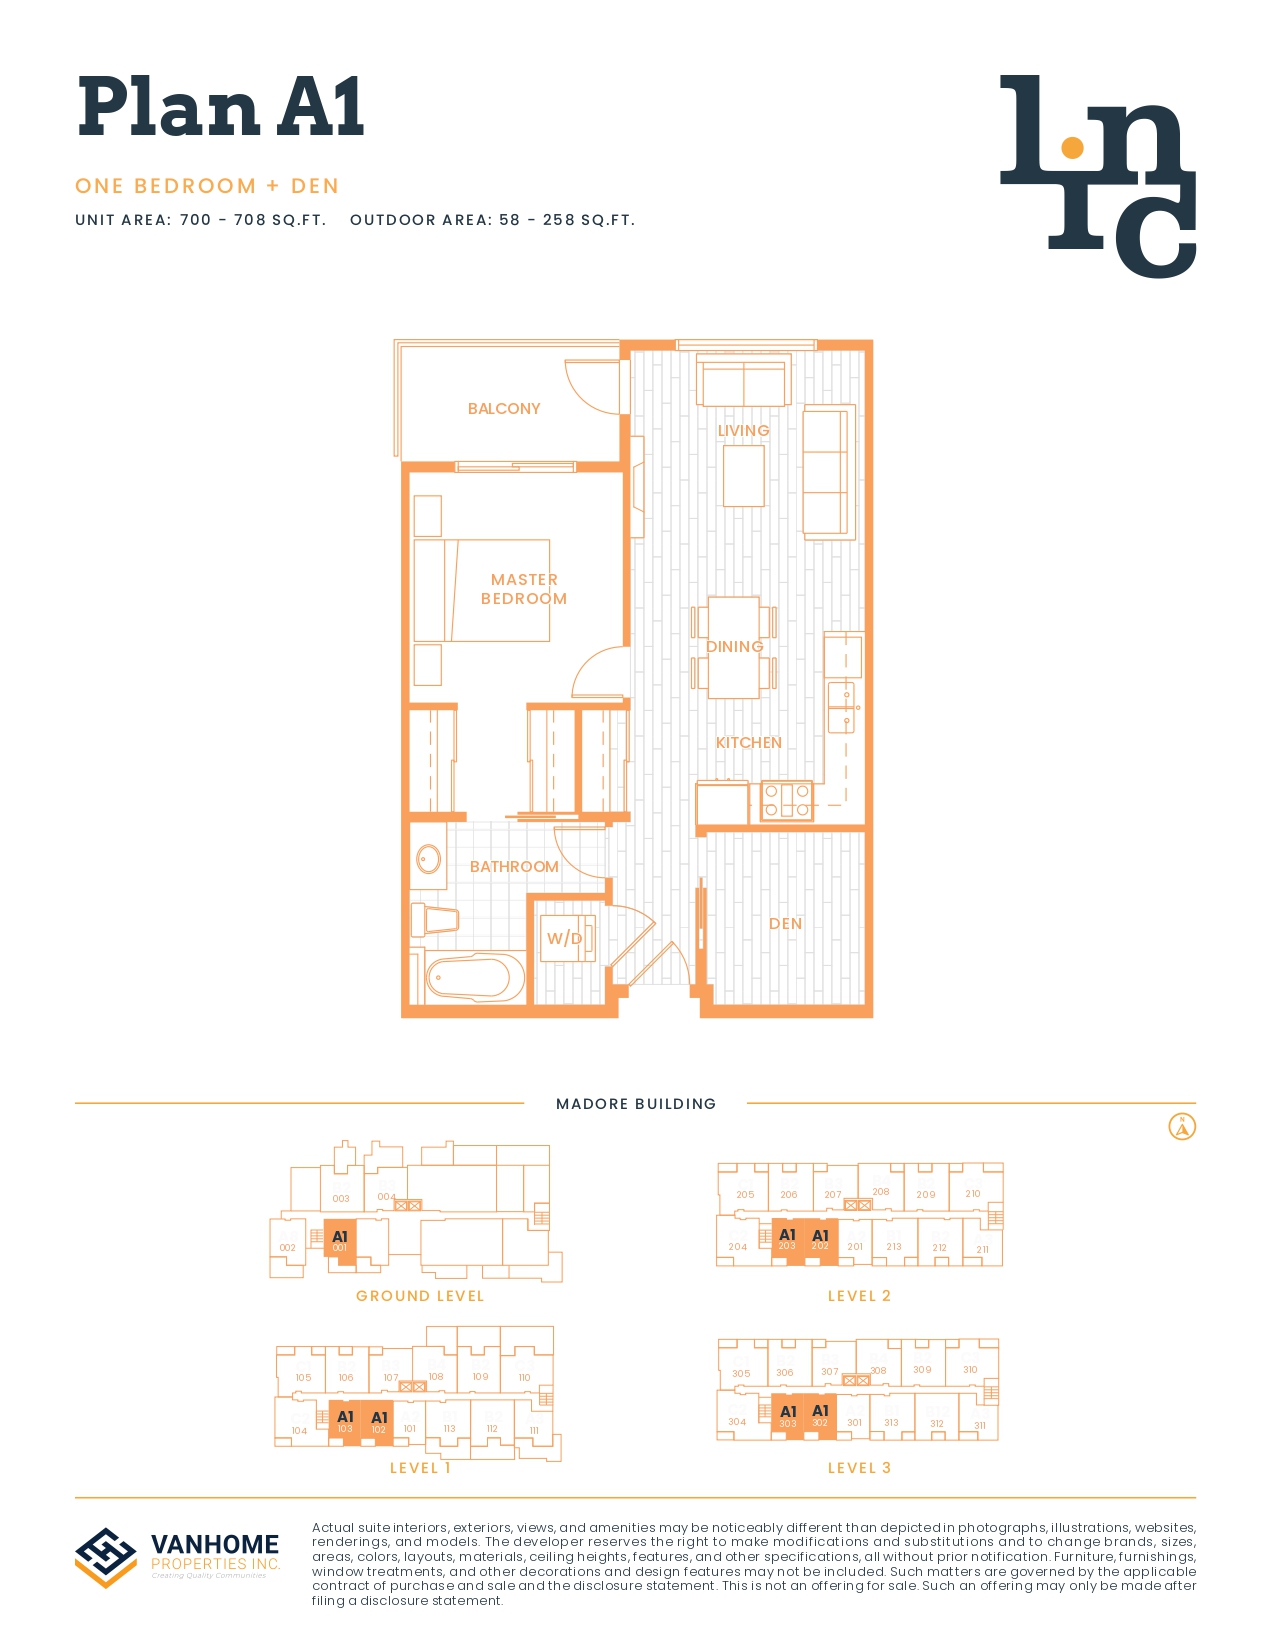  Floor Plan of Linc Condos with undefined beds